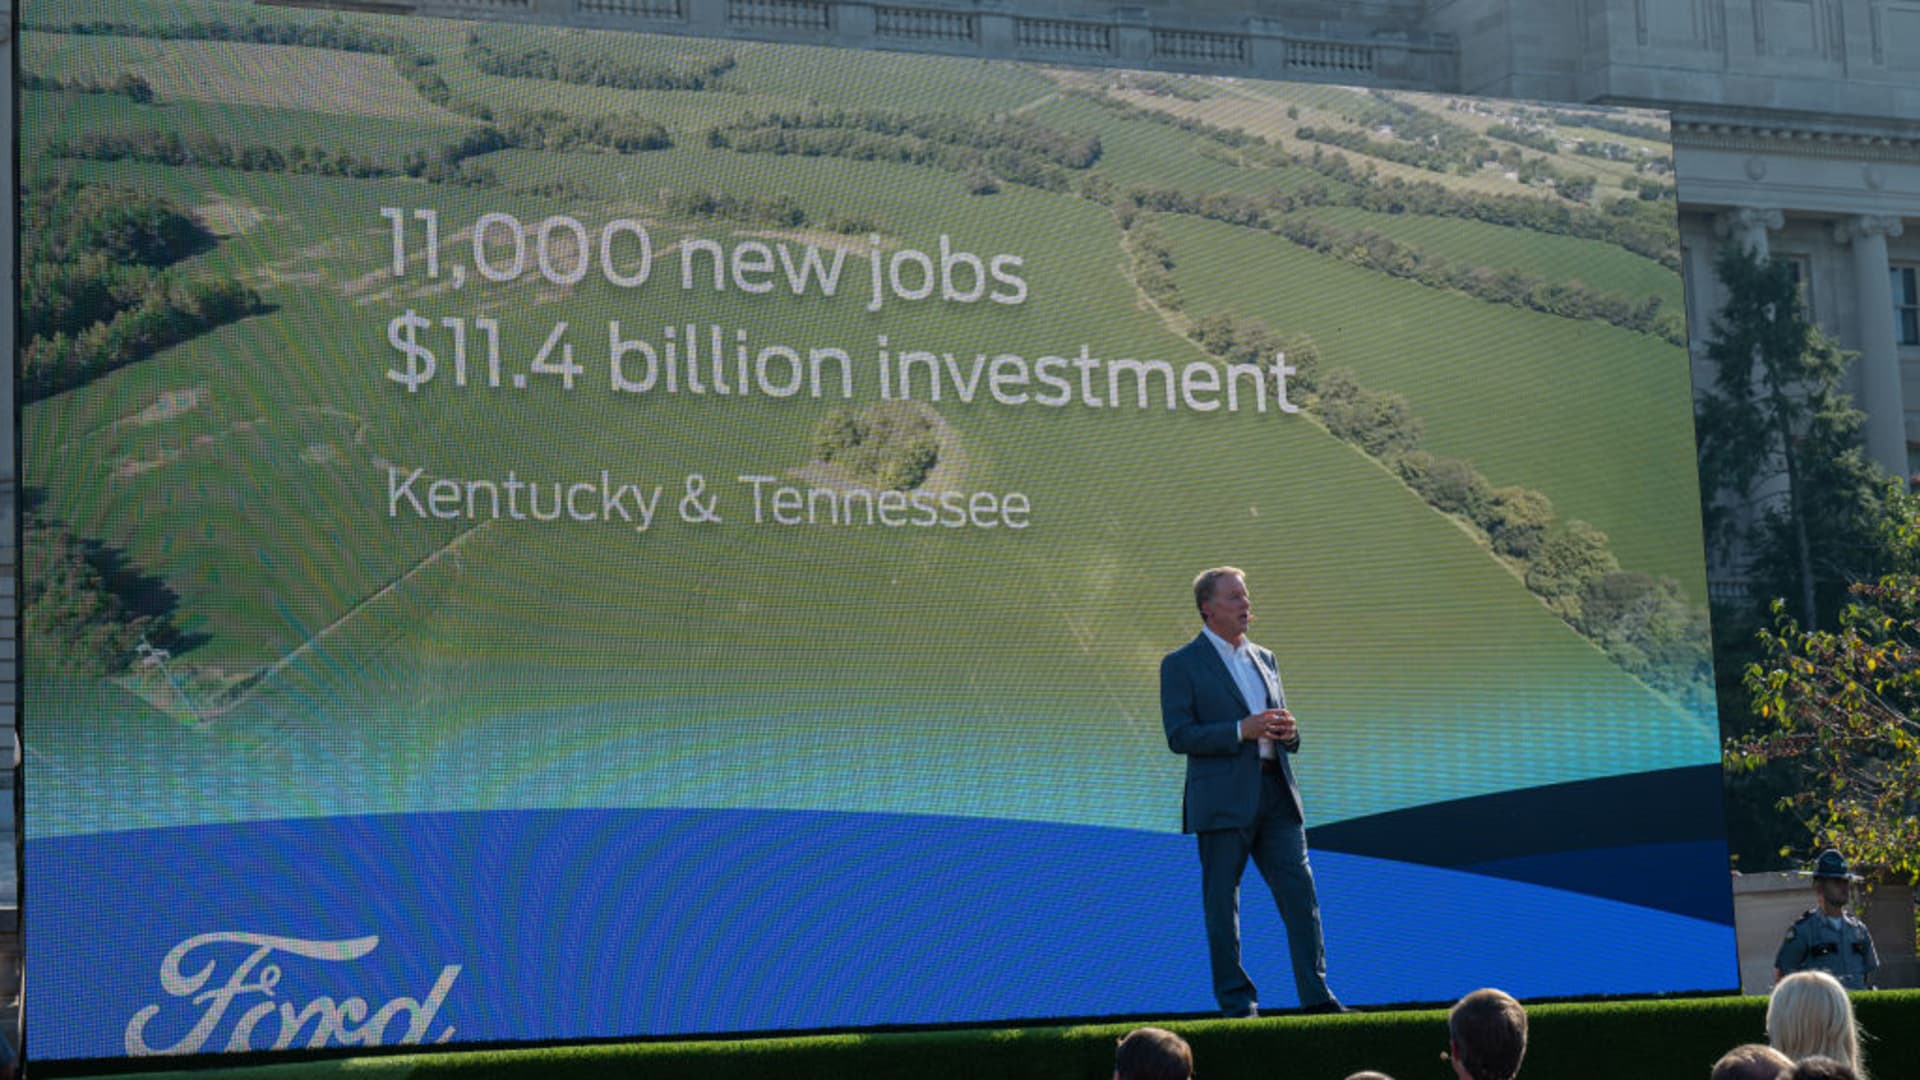 Bill Ford, chairman of Ford Motor Co., speaks during a Ford announcement event at the Kentucky State Capitol in Frankfort, Kentucky, U.S., on Tuesday, Sept. 28, 2021.